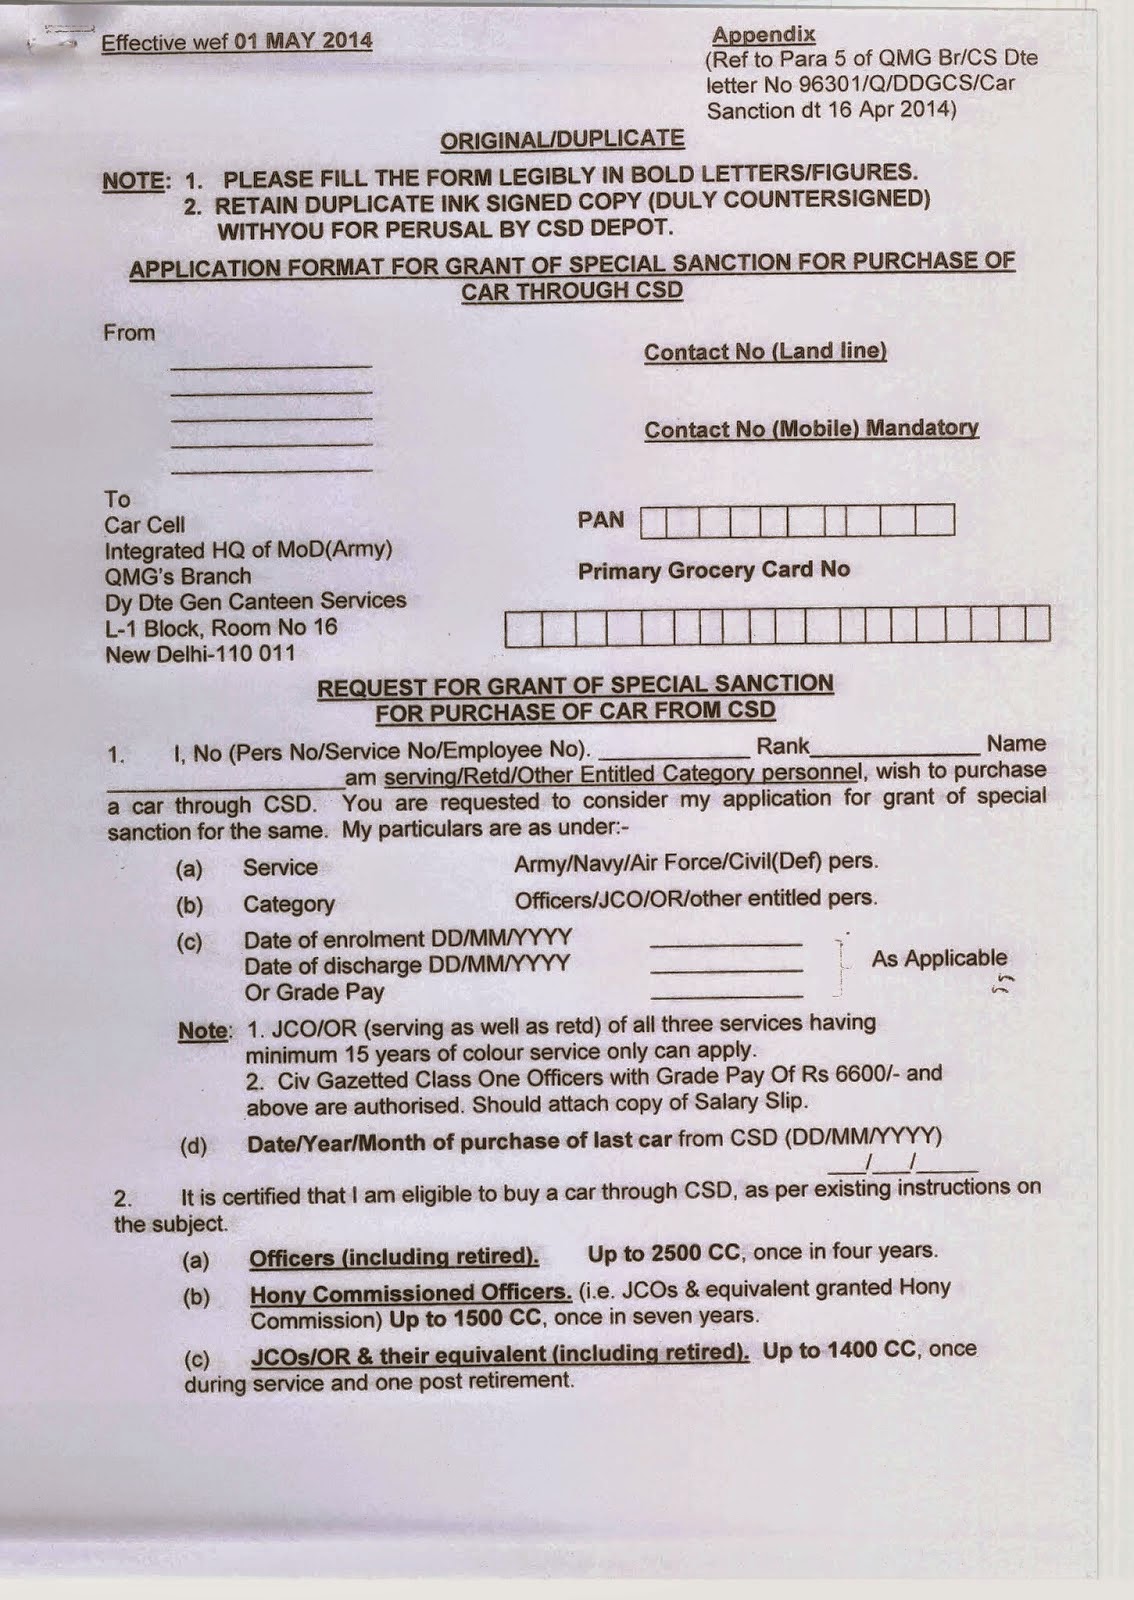 Application Format for Grant of Special Sanction for purchase of CAR through CSD